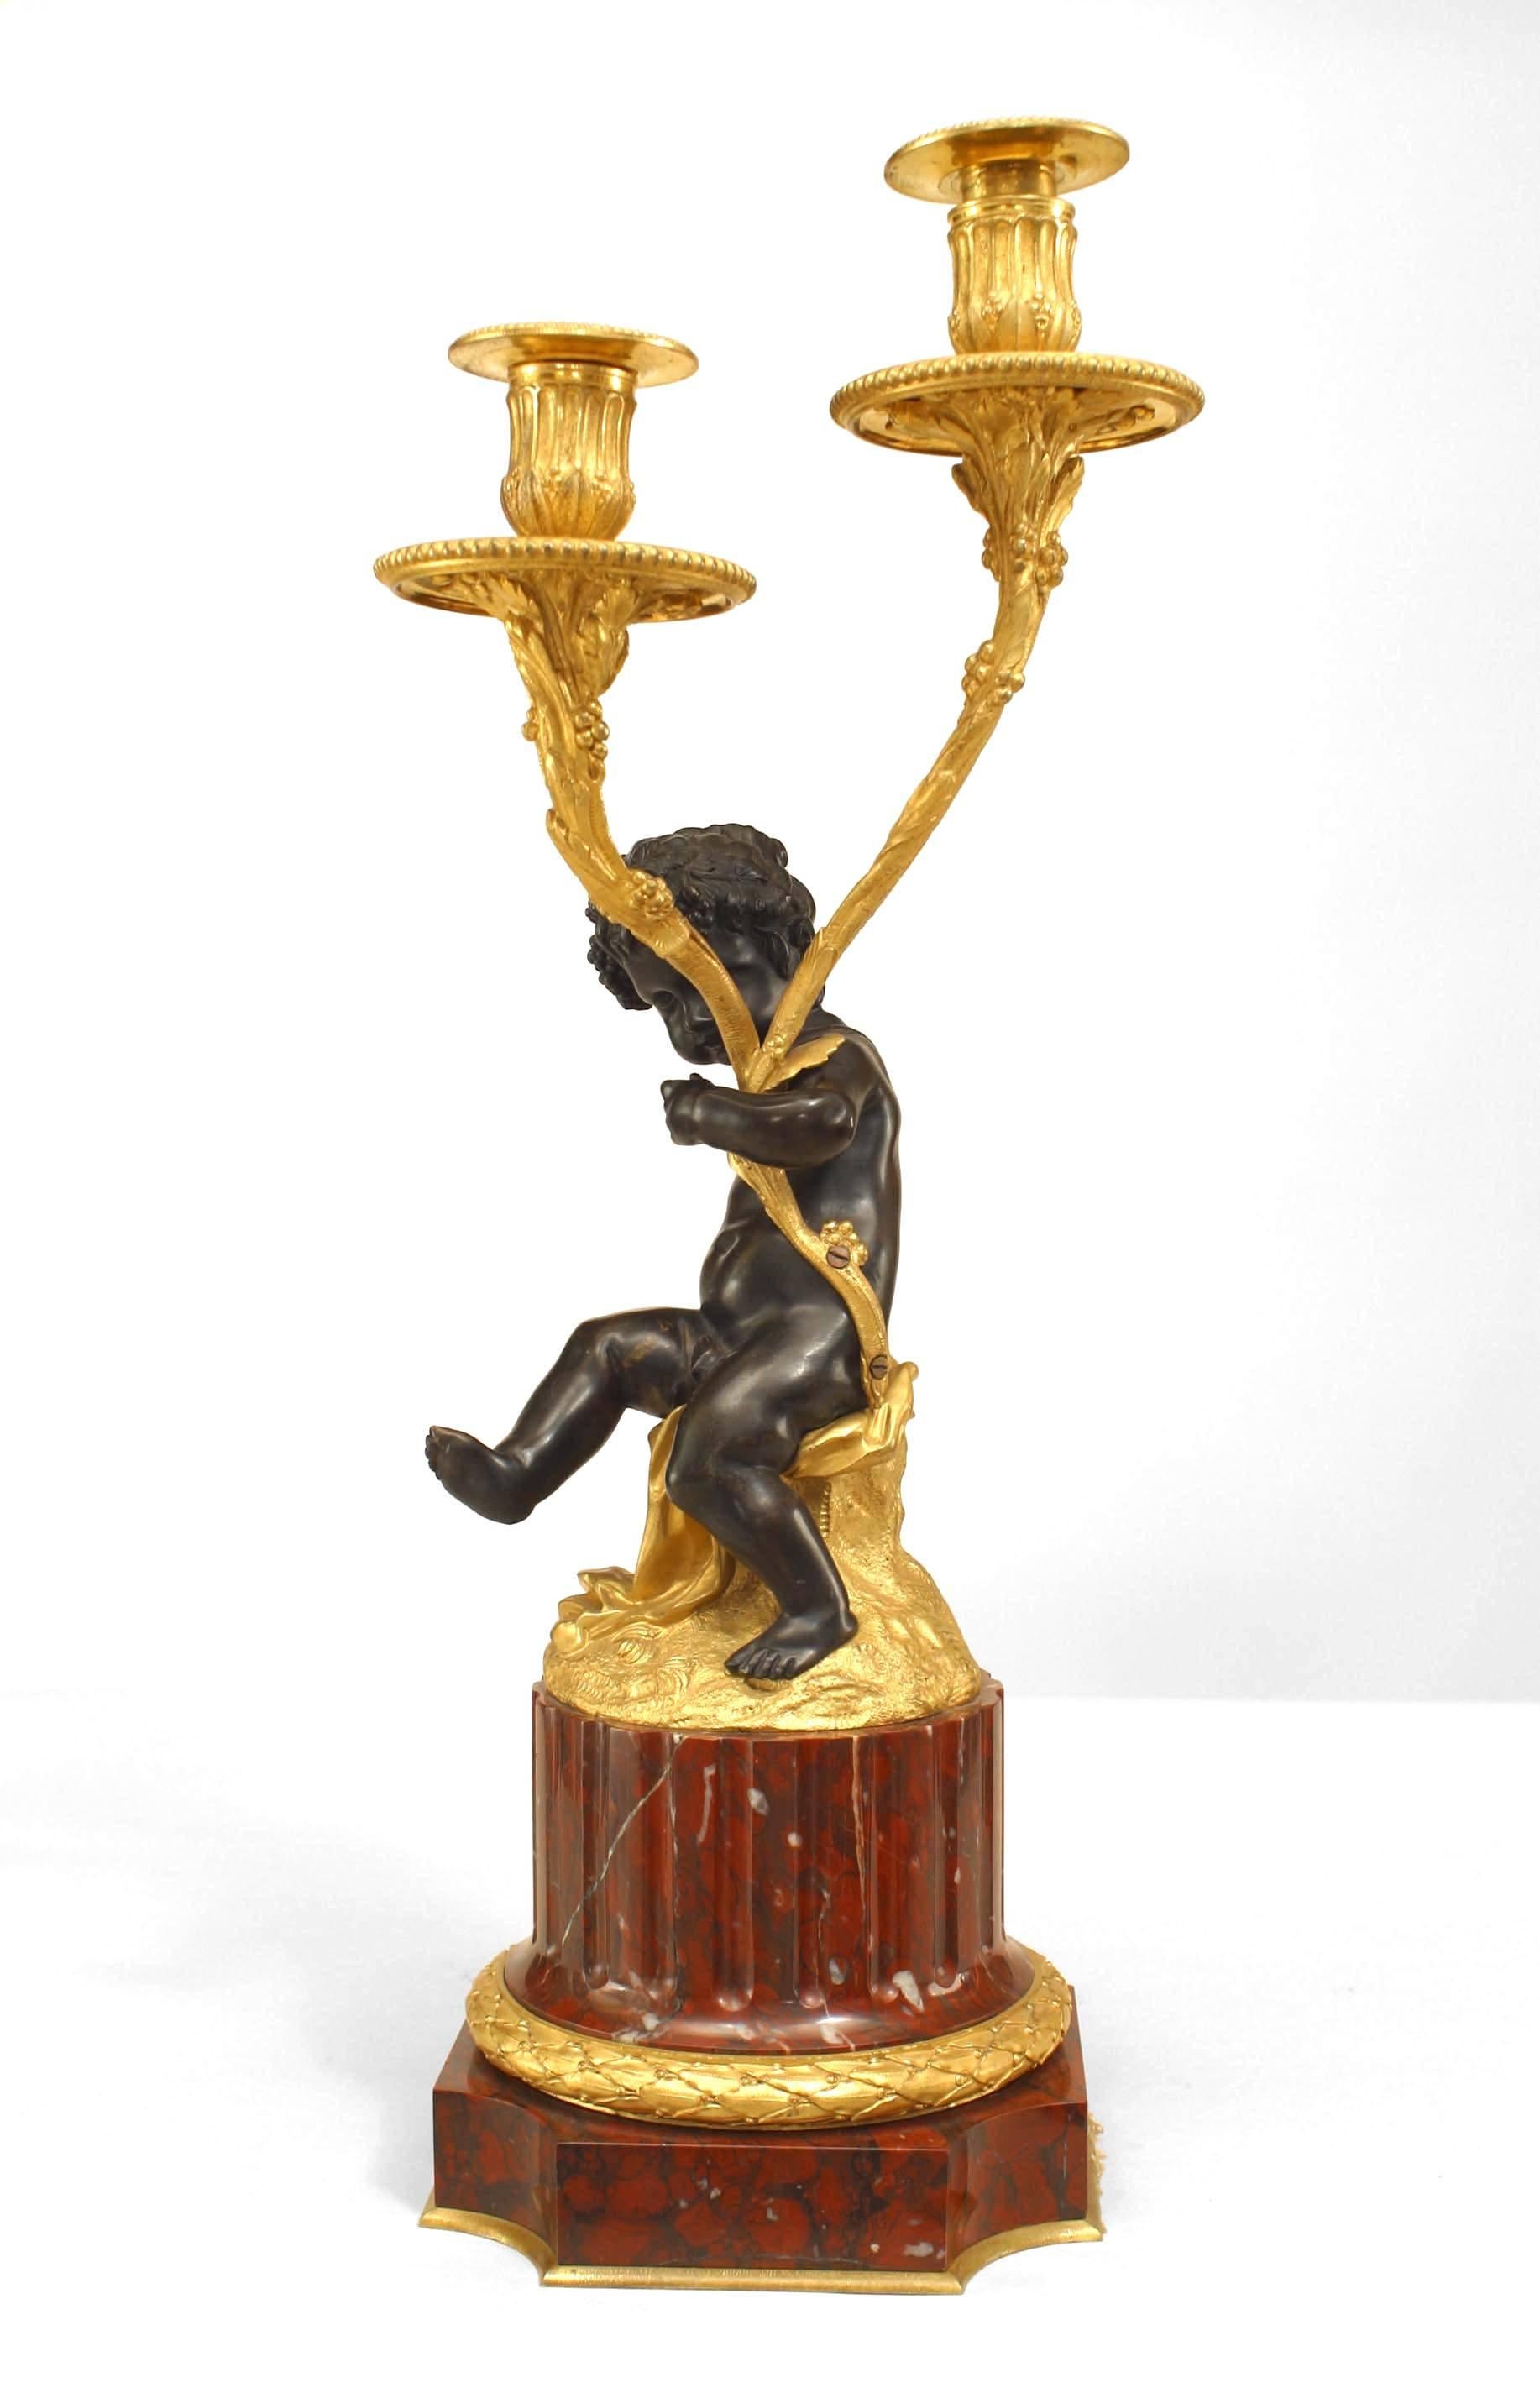 Pair of French Louis XVI-style (19th Century) gilt and patinated bronze candelabra with a cupid/satyr figure holding 2 foliate arms and raised on rouge marble bases (PRICED AS Pair)
